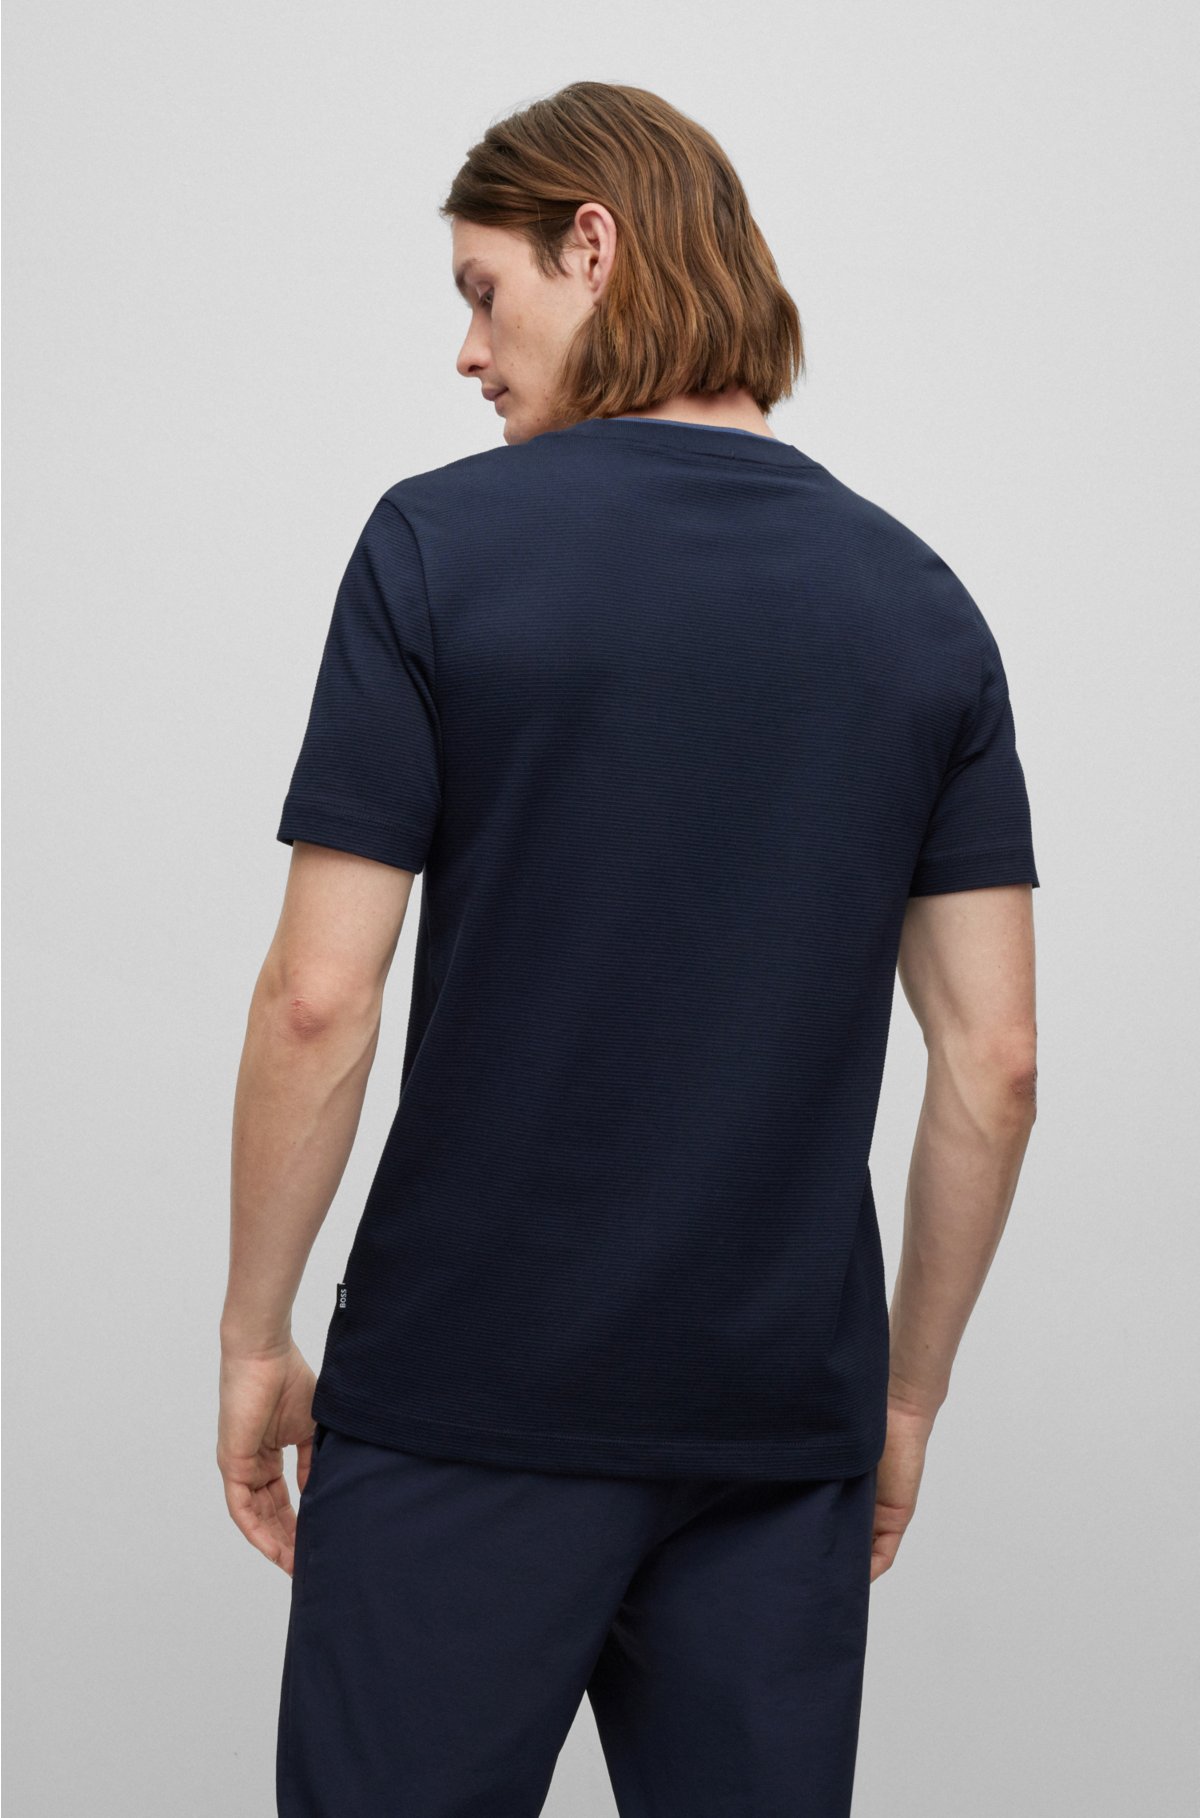 BOSS - T-shirt structured double cotton in Slim-fit collar with